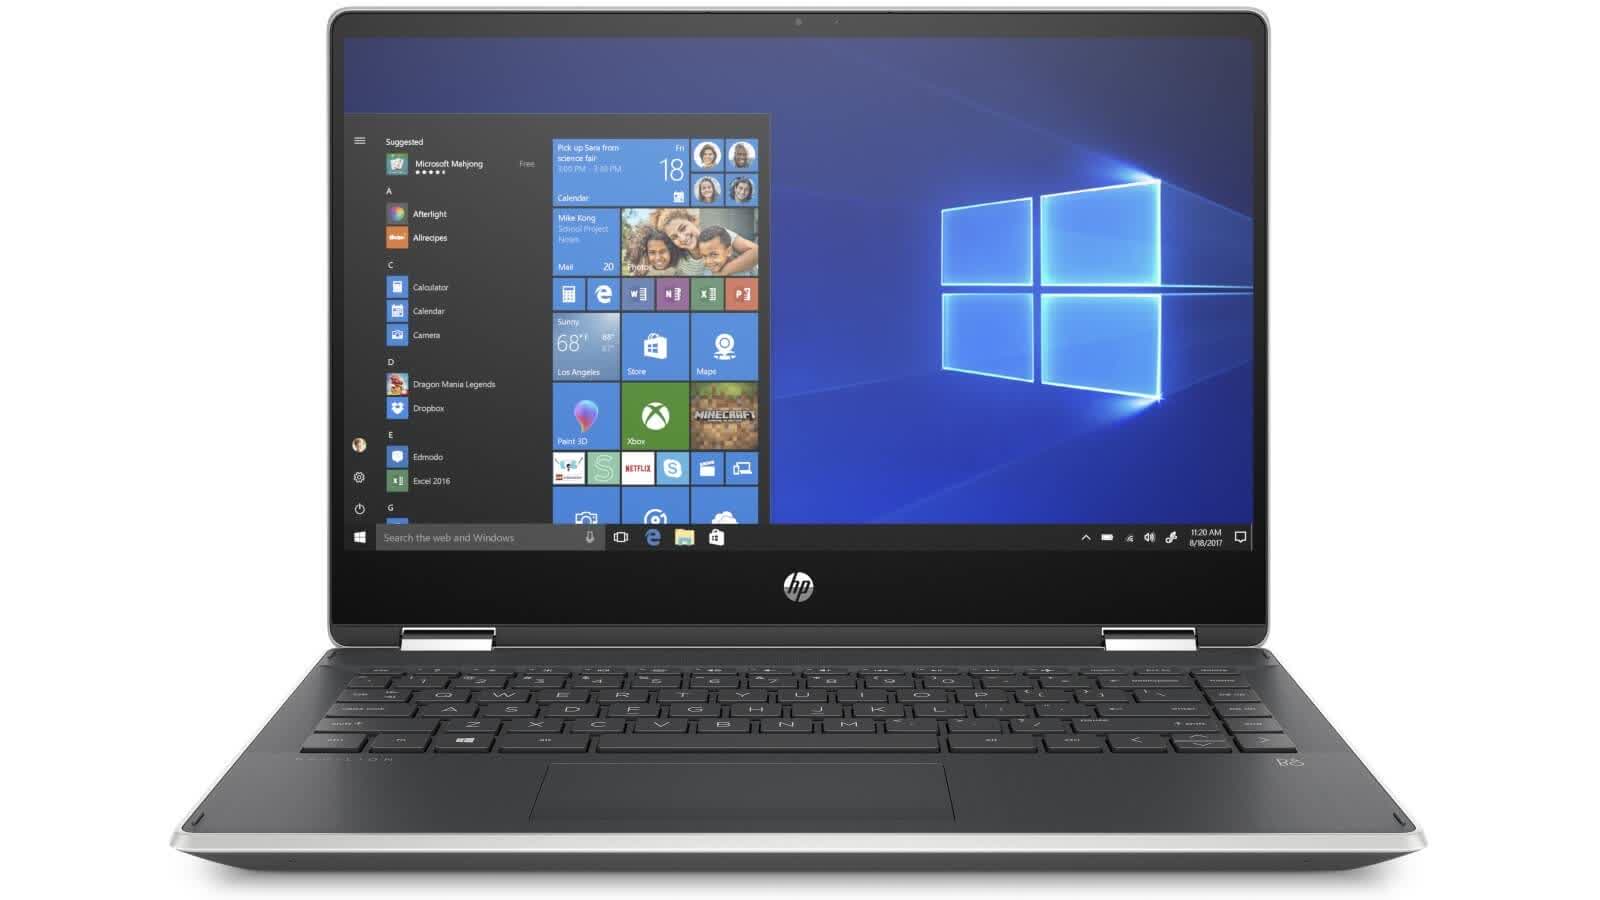 HP Pavilion x360 14 - 2020 Reviews, Pros and Cons | TechSpot